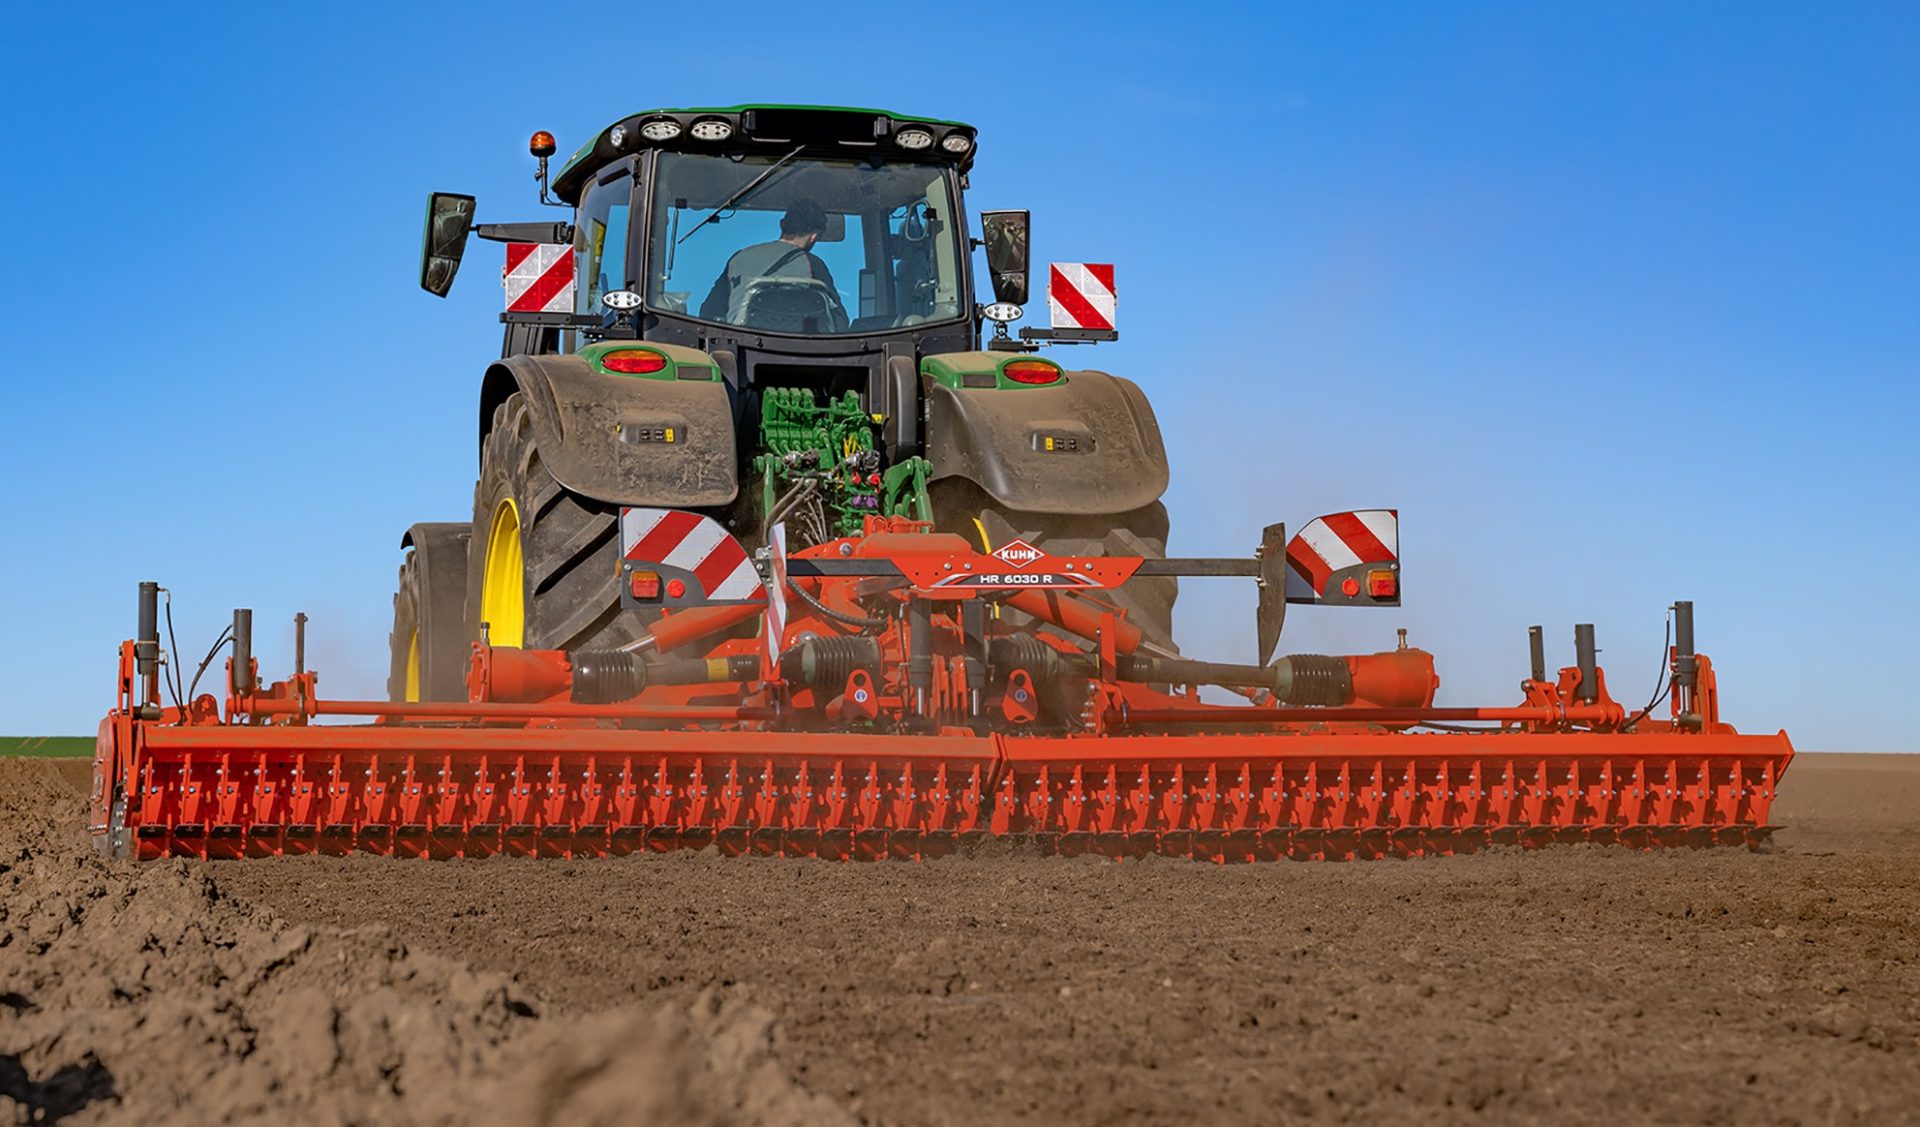 Trio of Kuhn power harrows and Sitera mounted drills